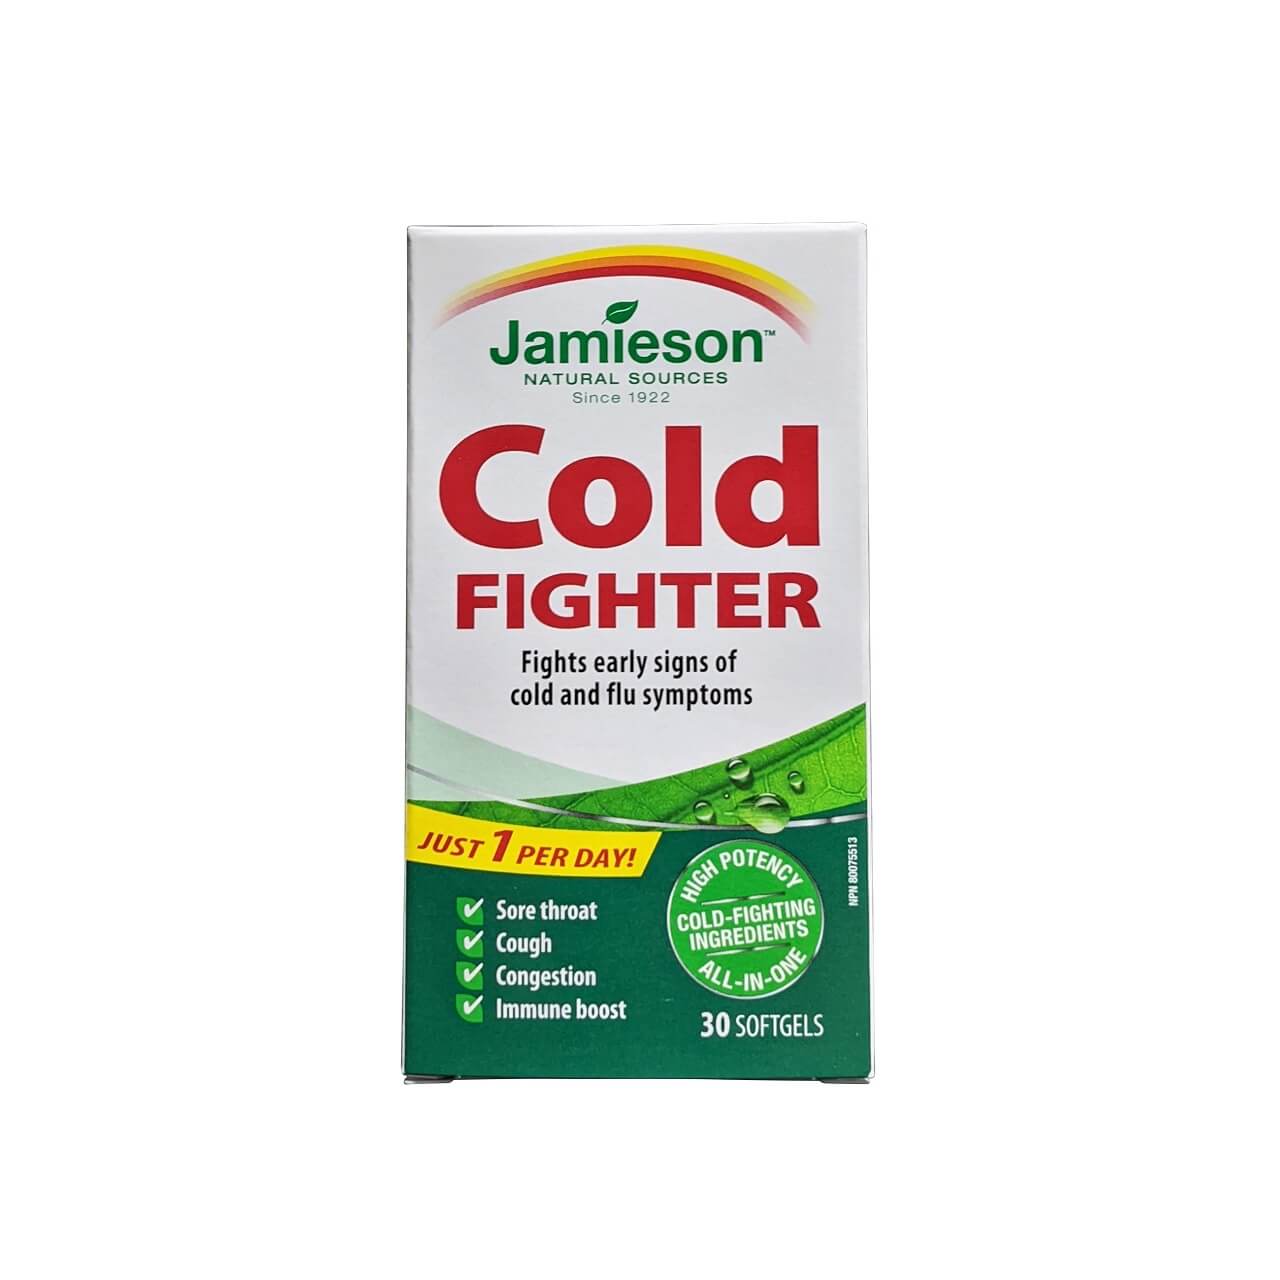 Product label for Jamieson Cold Fighter Softgels (30 softgels) in English